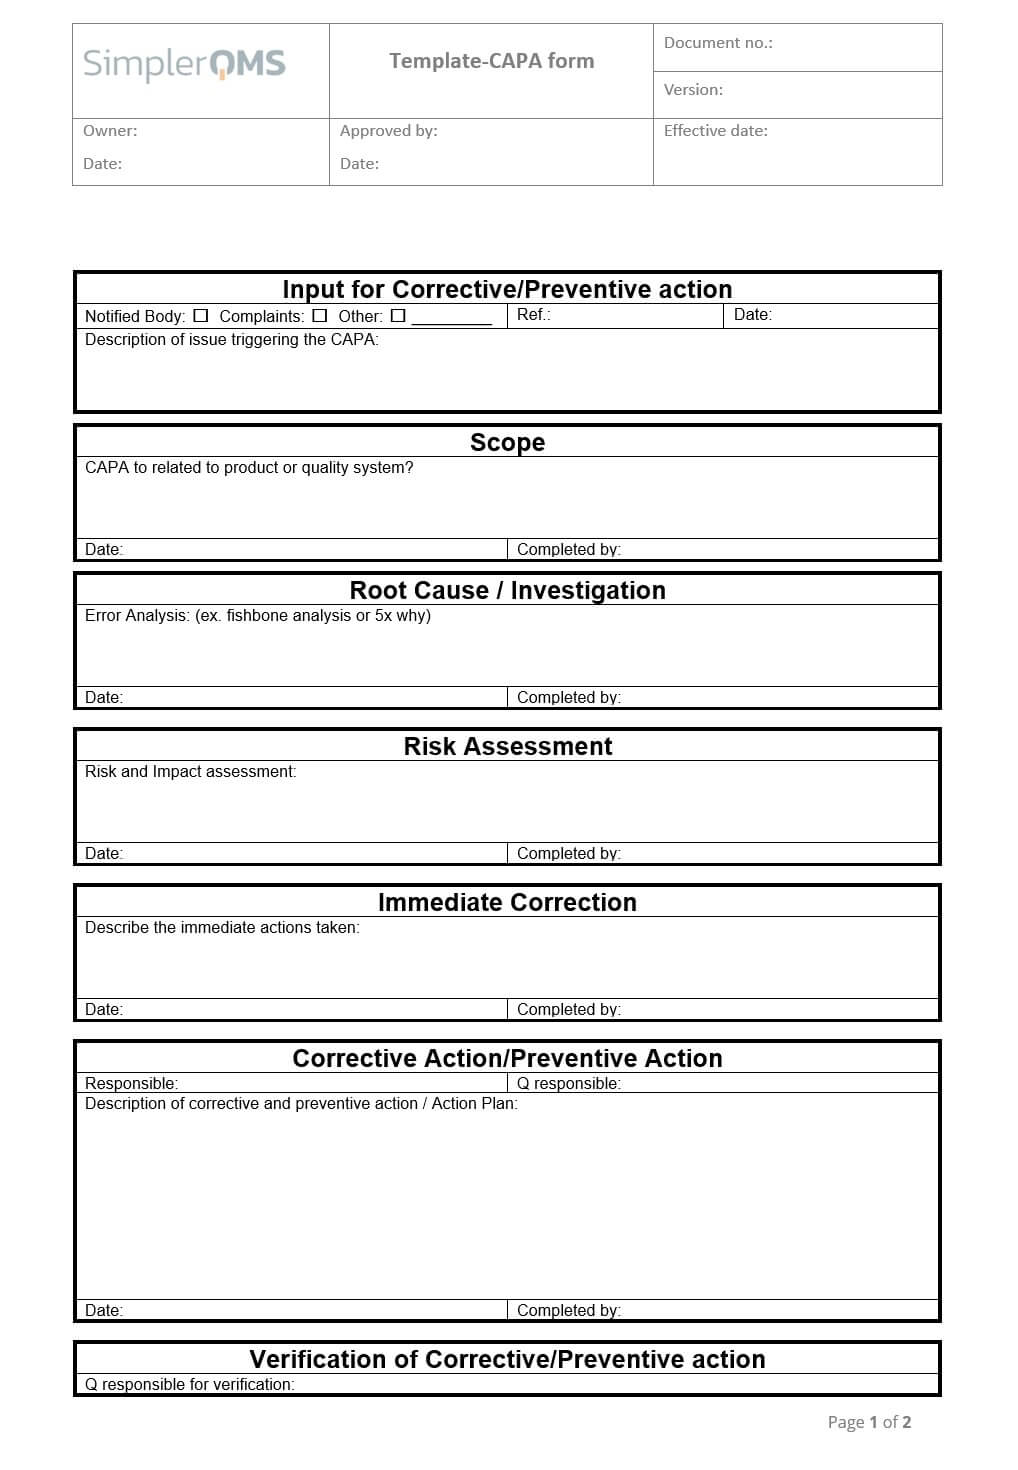 Corrective And Preventive Action CAPA Form Template SimplerQMS